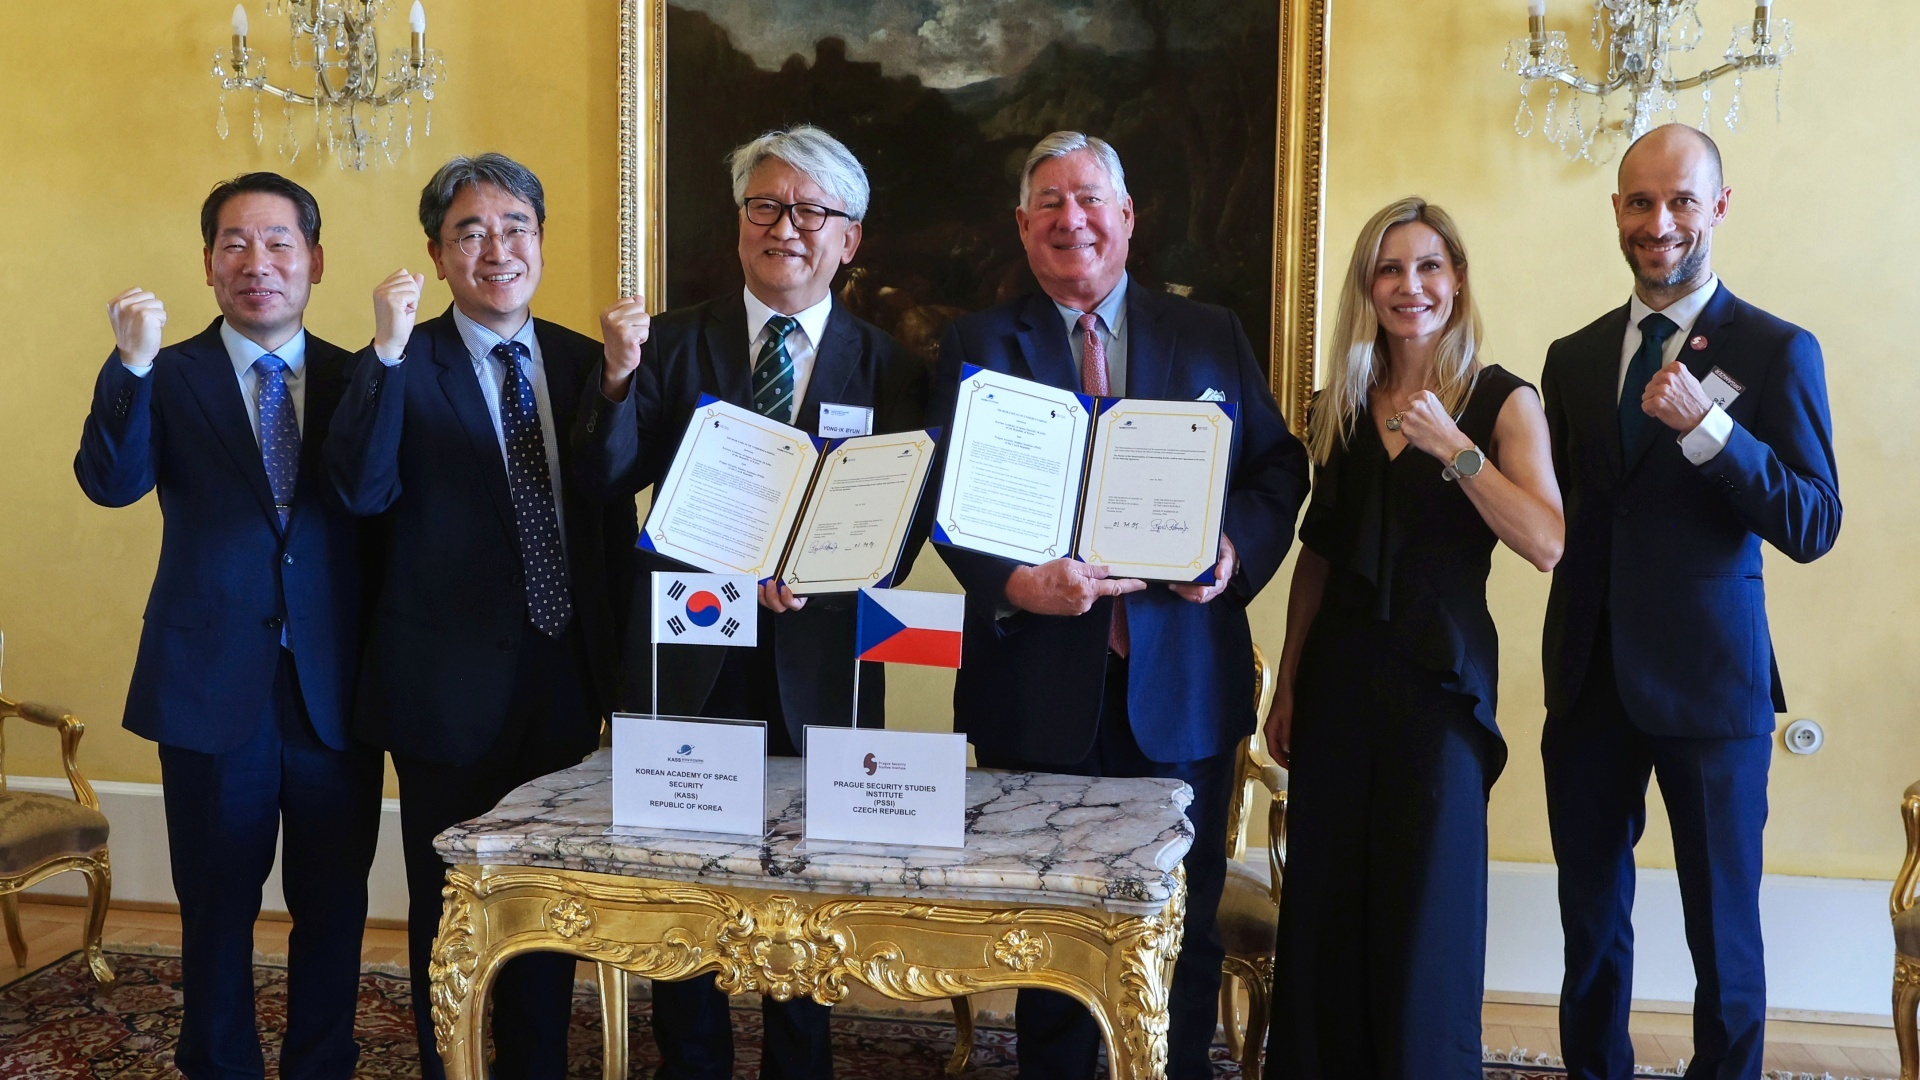 PSSI and Korean Academy of Space Security Announce Partnership